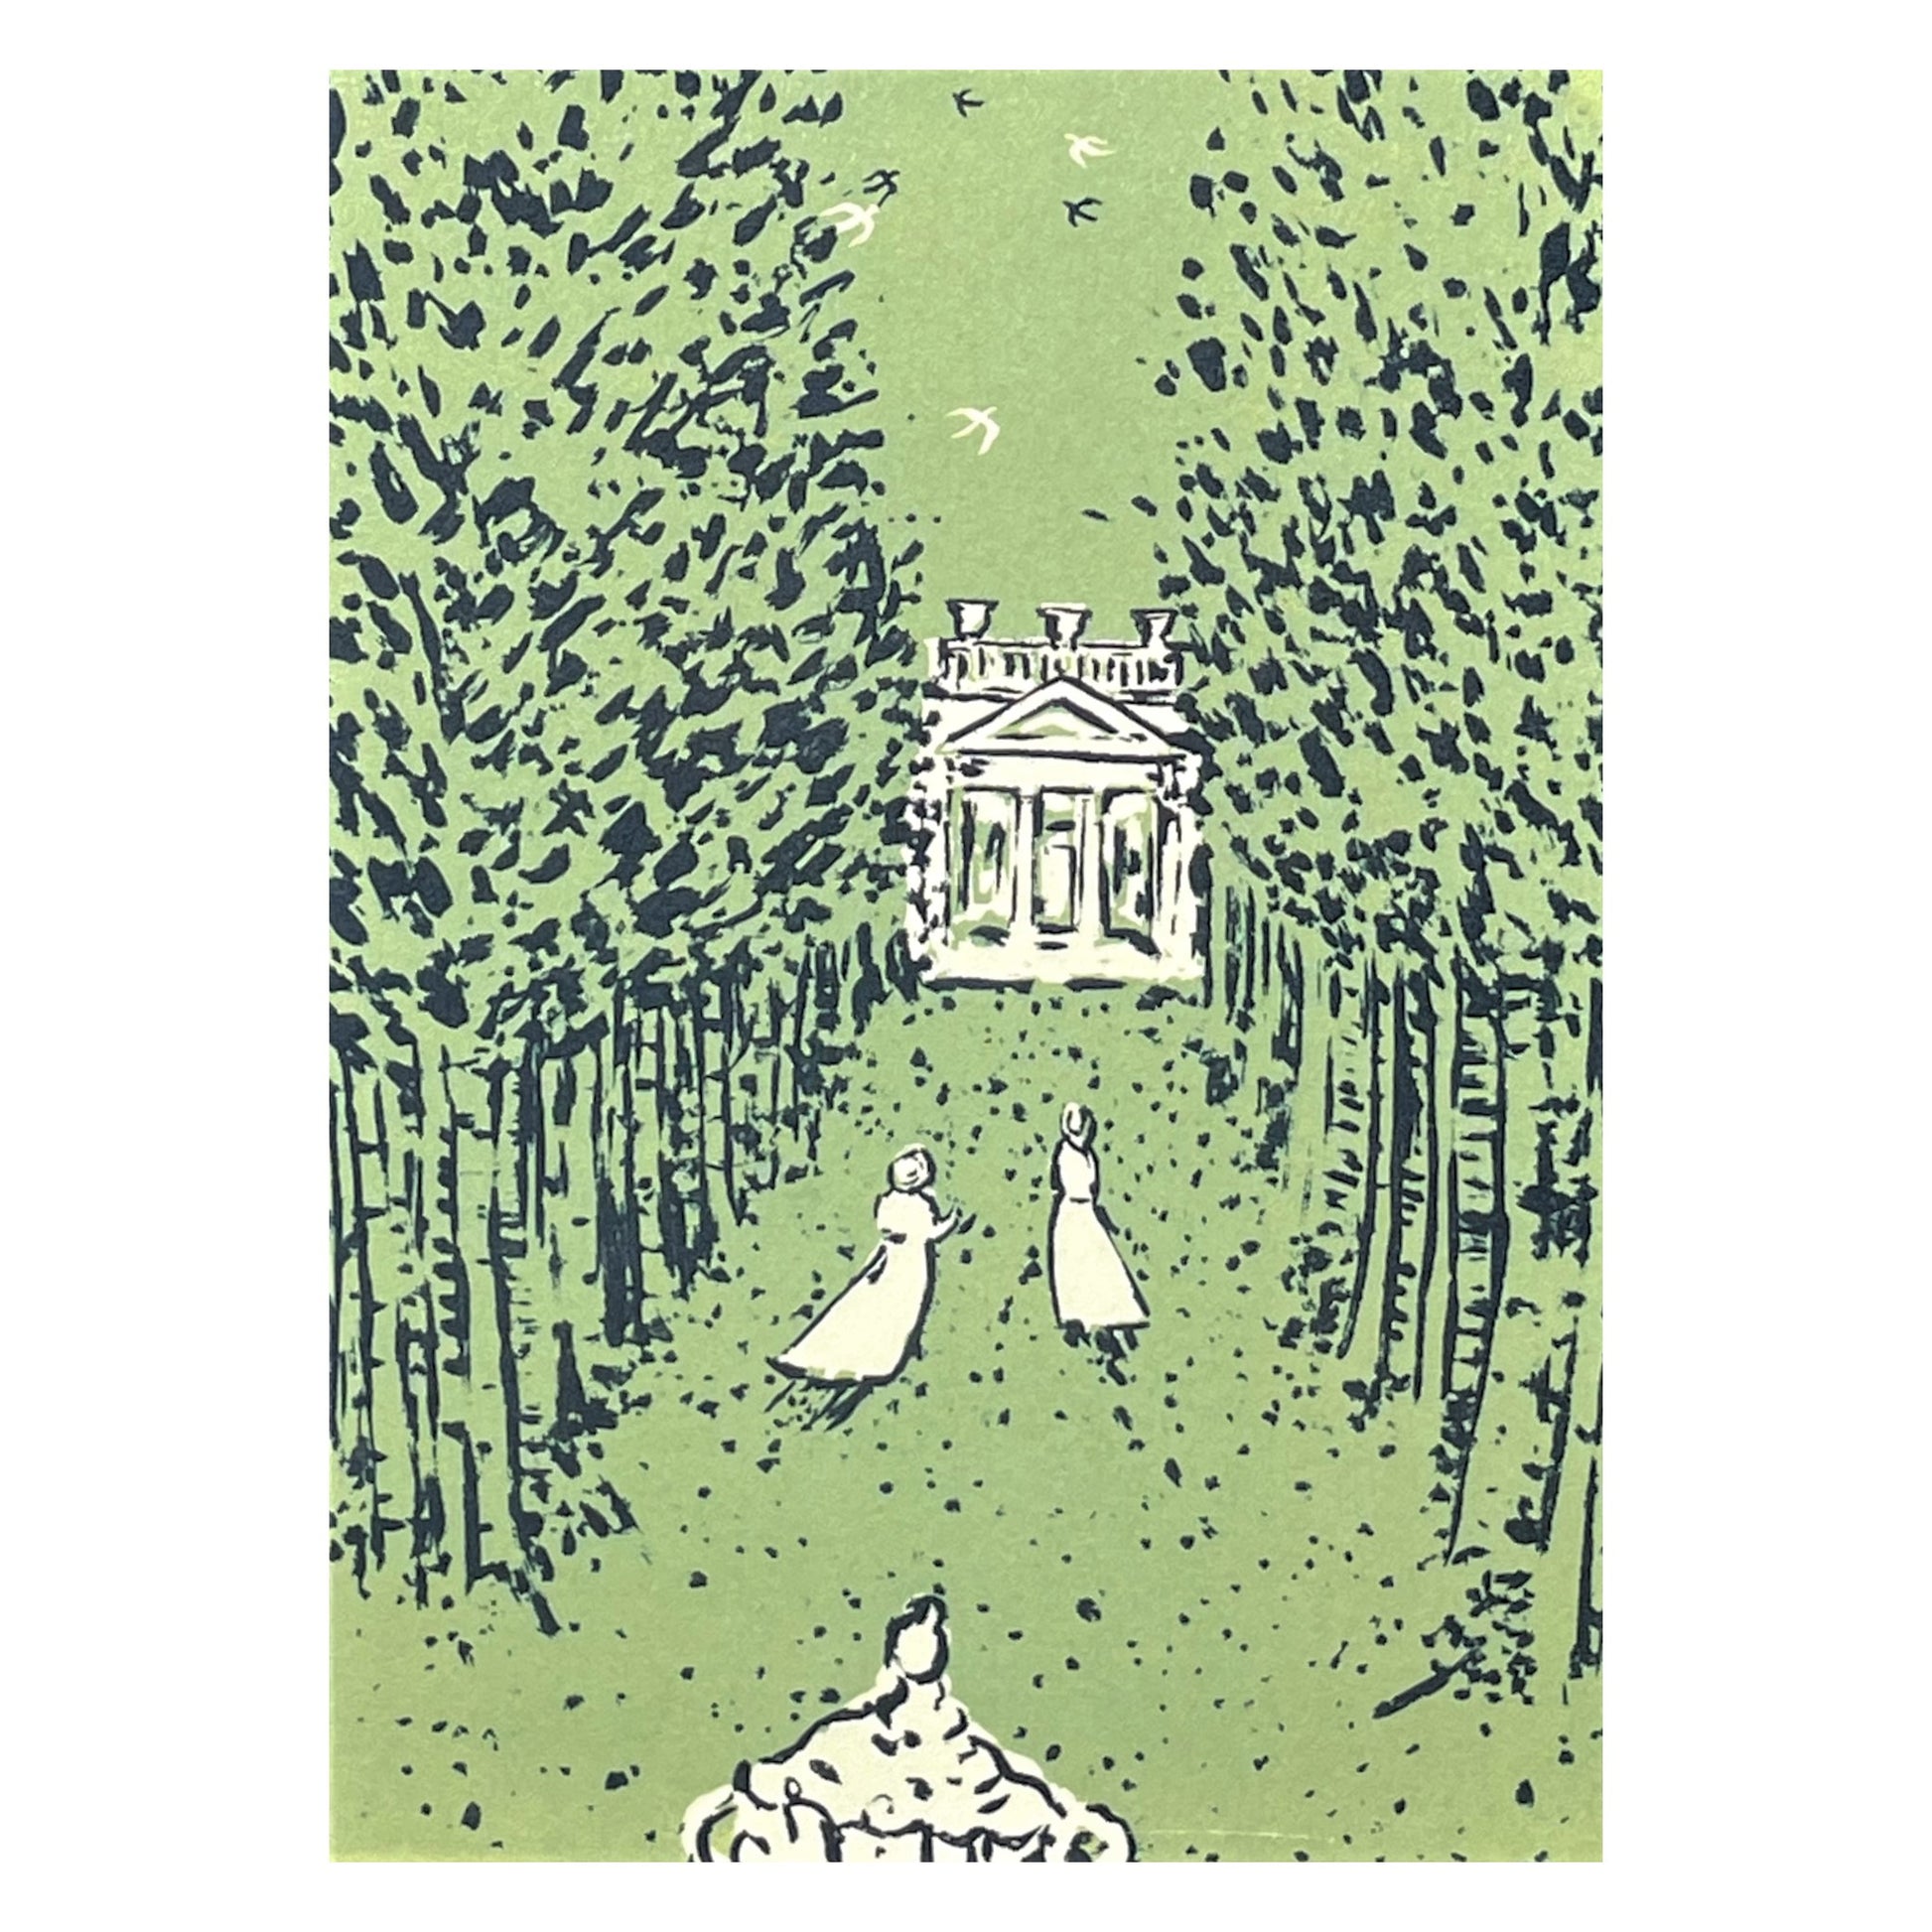 greetings card of a drawing of two women running up to a white summer house with green backdrop by Elizabeth Harbour